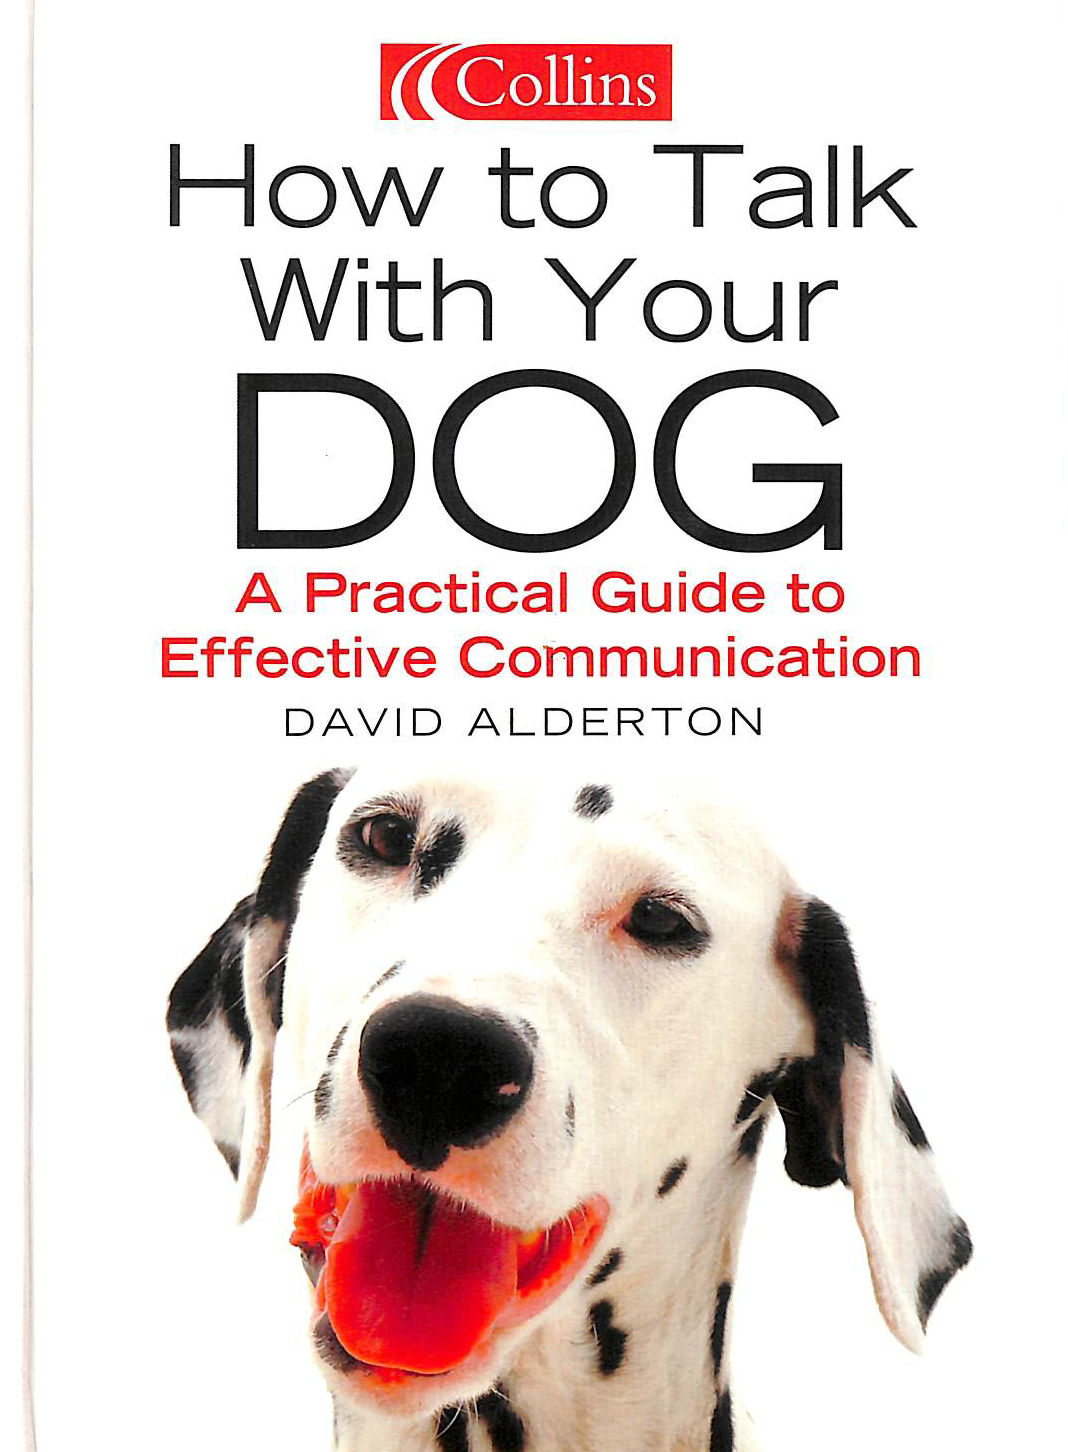 ALDERTON, DAVID - How to Talk with your Dog